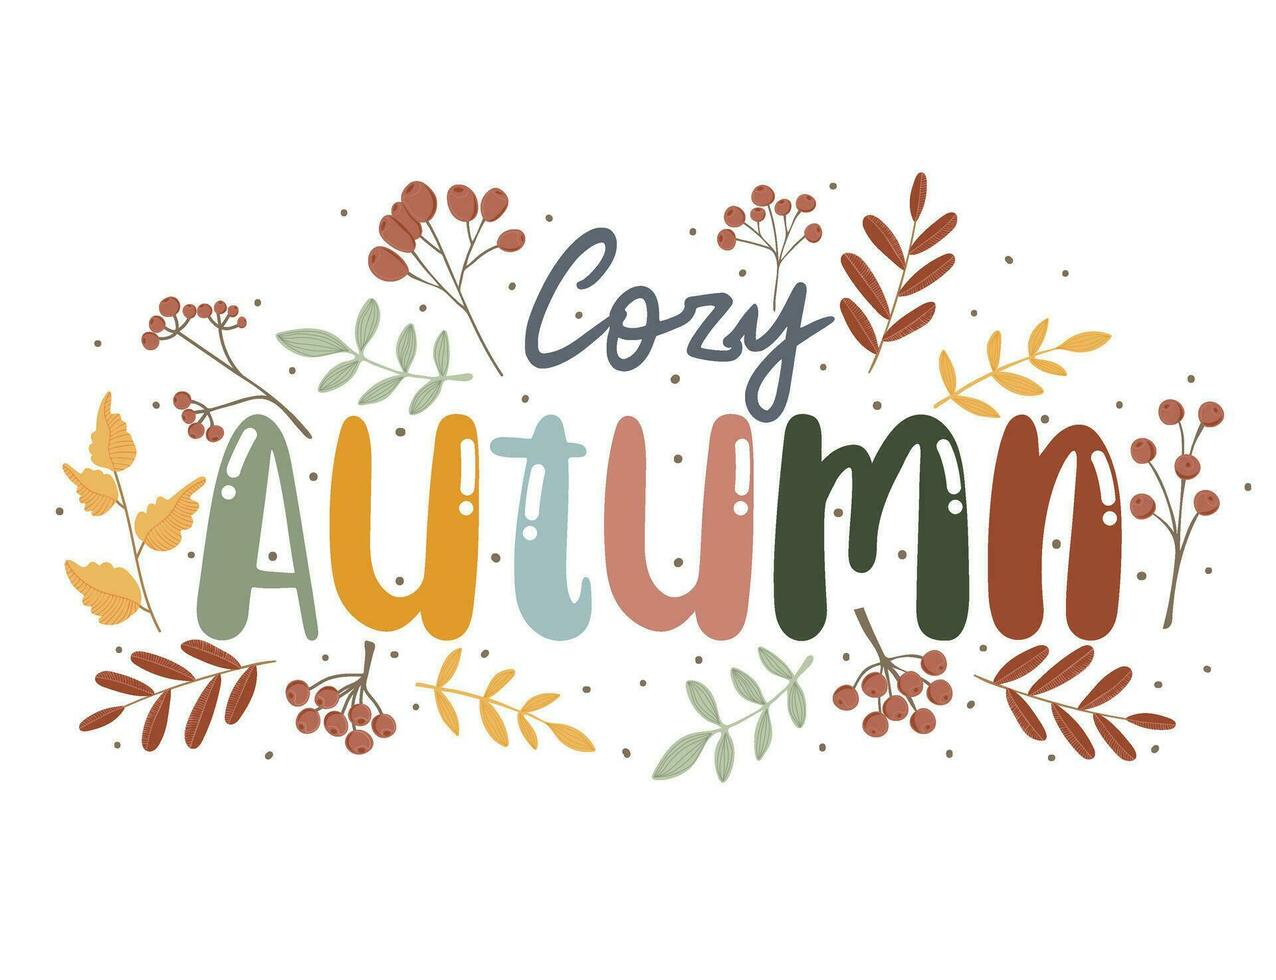 Cozy Autumn quote with leaves and berries. Hand drawn lettering. Autumn decorative element with leaves for banners, posters, Cards, t-shirt designs, invitations vector